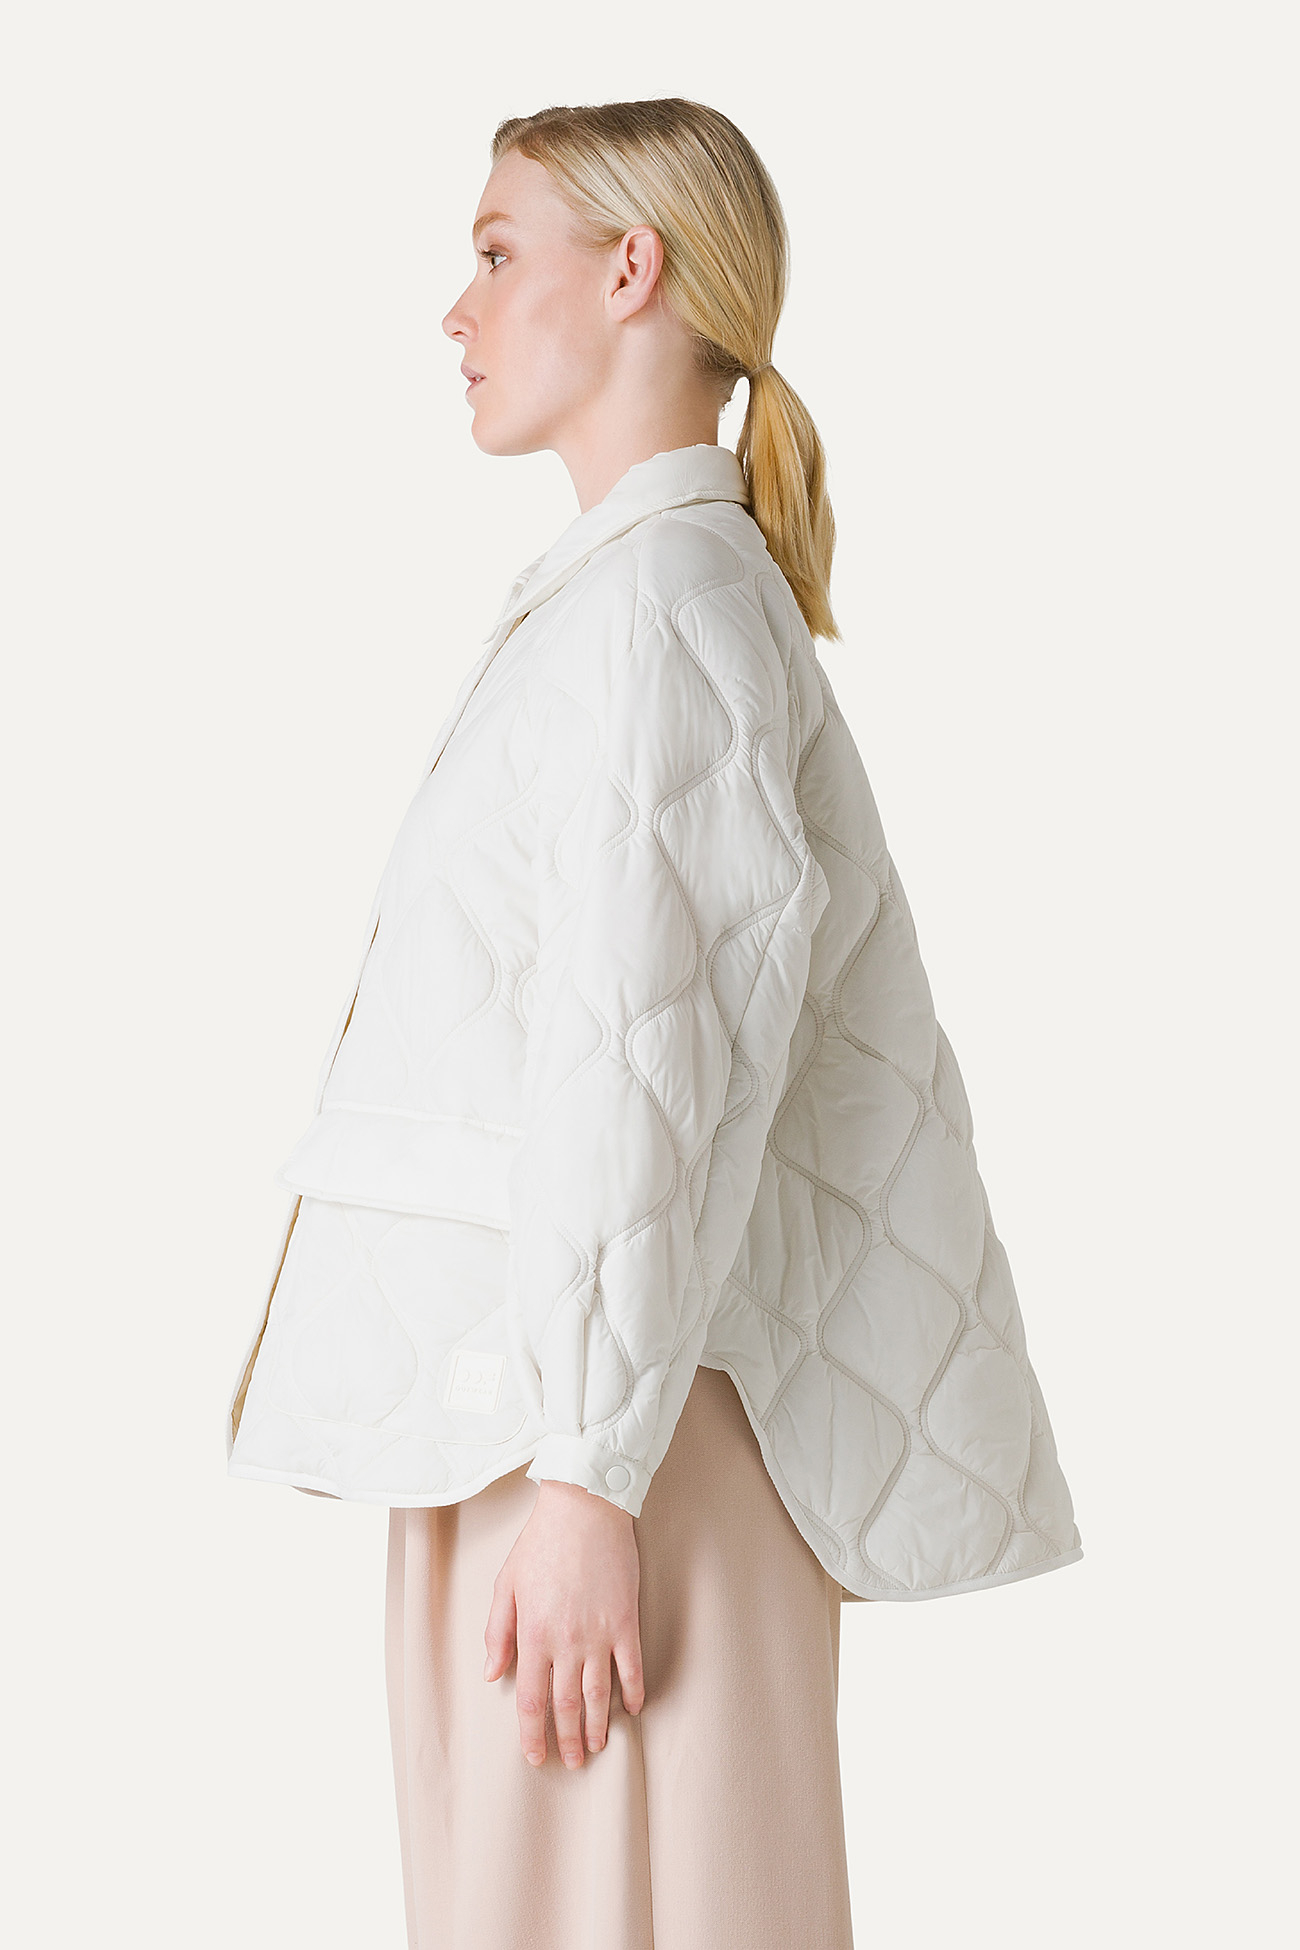 OVERSIZE JACKET IN QUILTED LIGHT NYLON 9222 - BUTTER - OOF WEAR